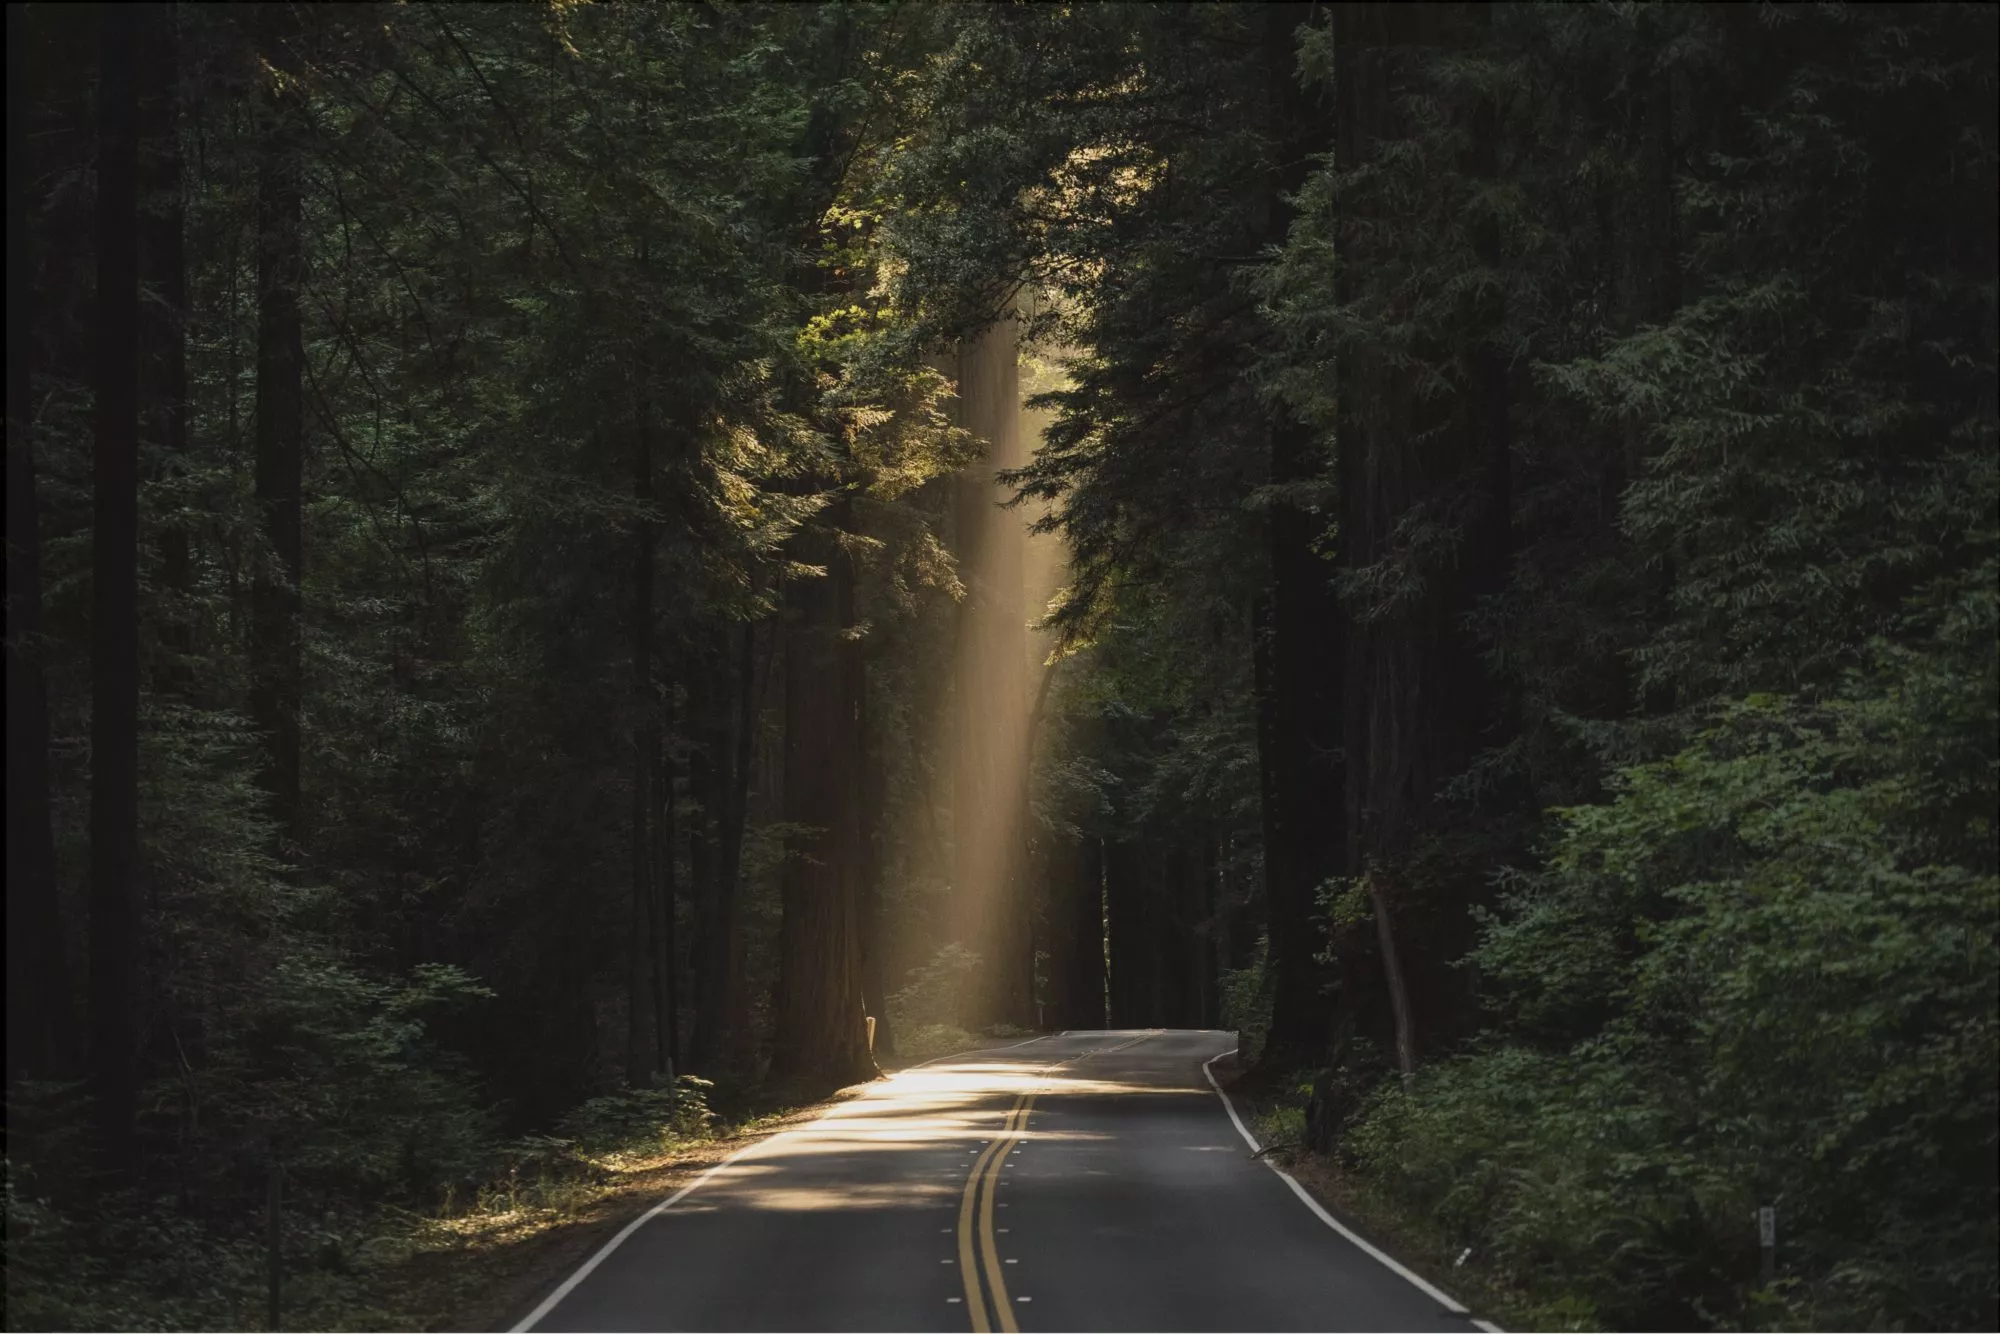 Two-lane road surrounded by forest with ray of sunlight hitting it